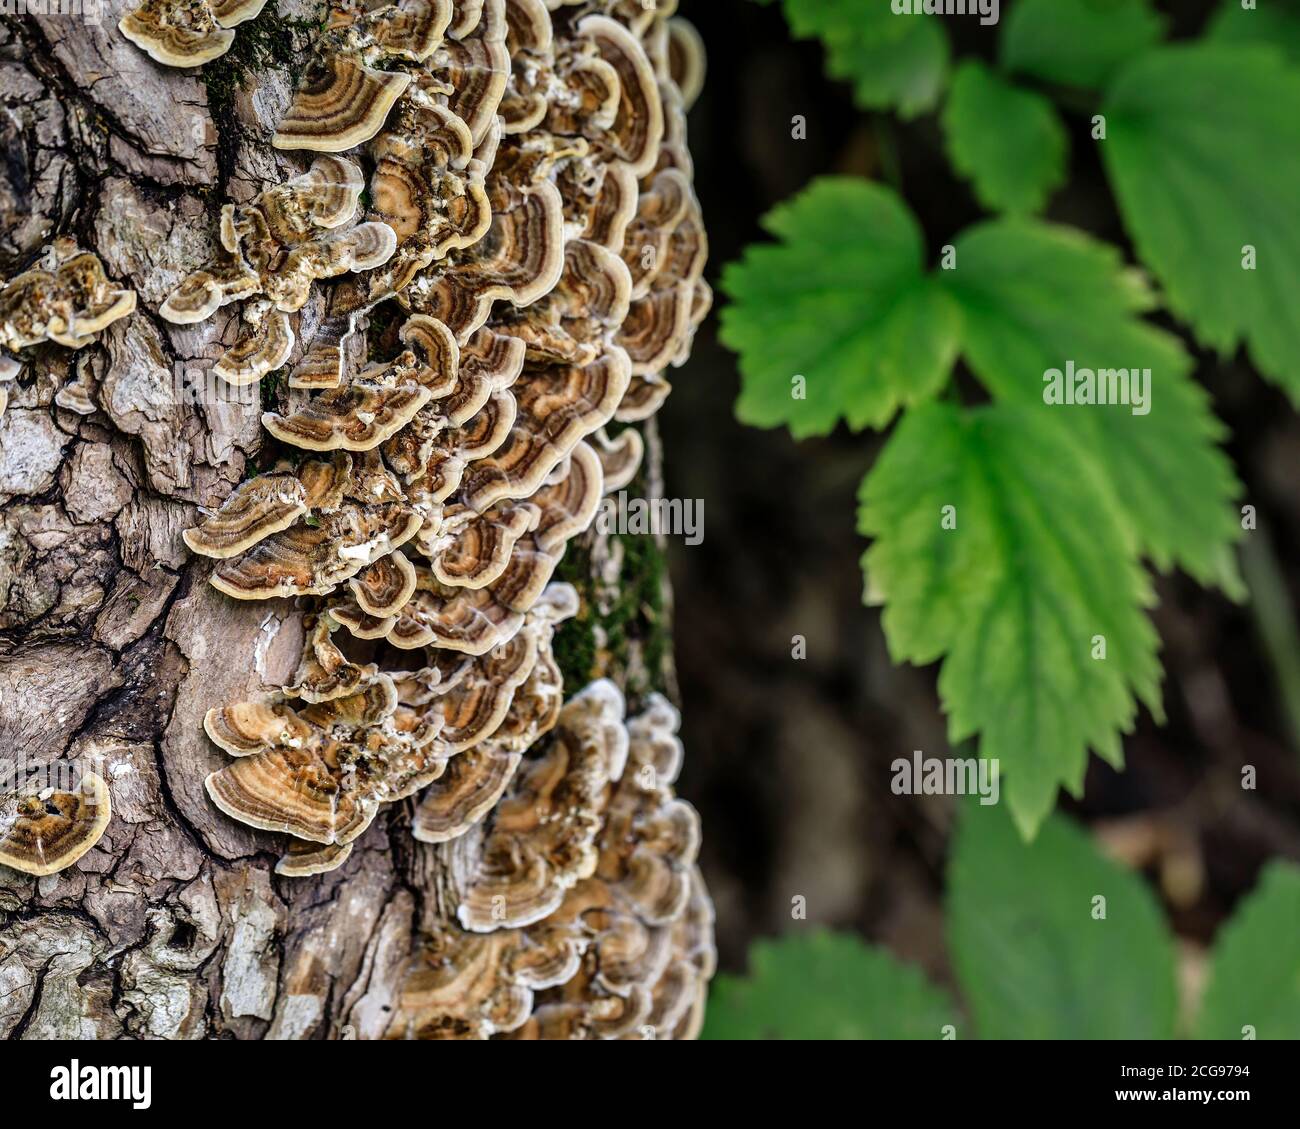 Turkey Tail Mushrooms (Trametes versicolor), growing on a tree trunk, La Barriere Park, Manitoba, Canada. Stock Photo